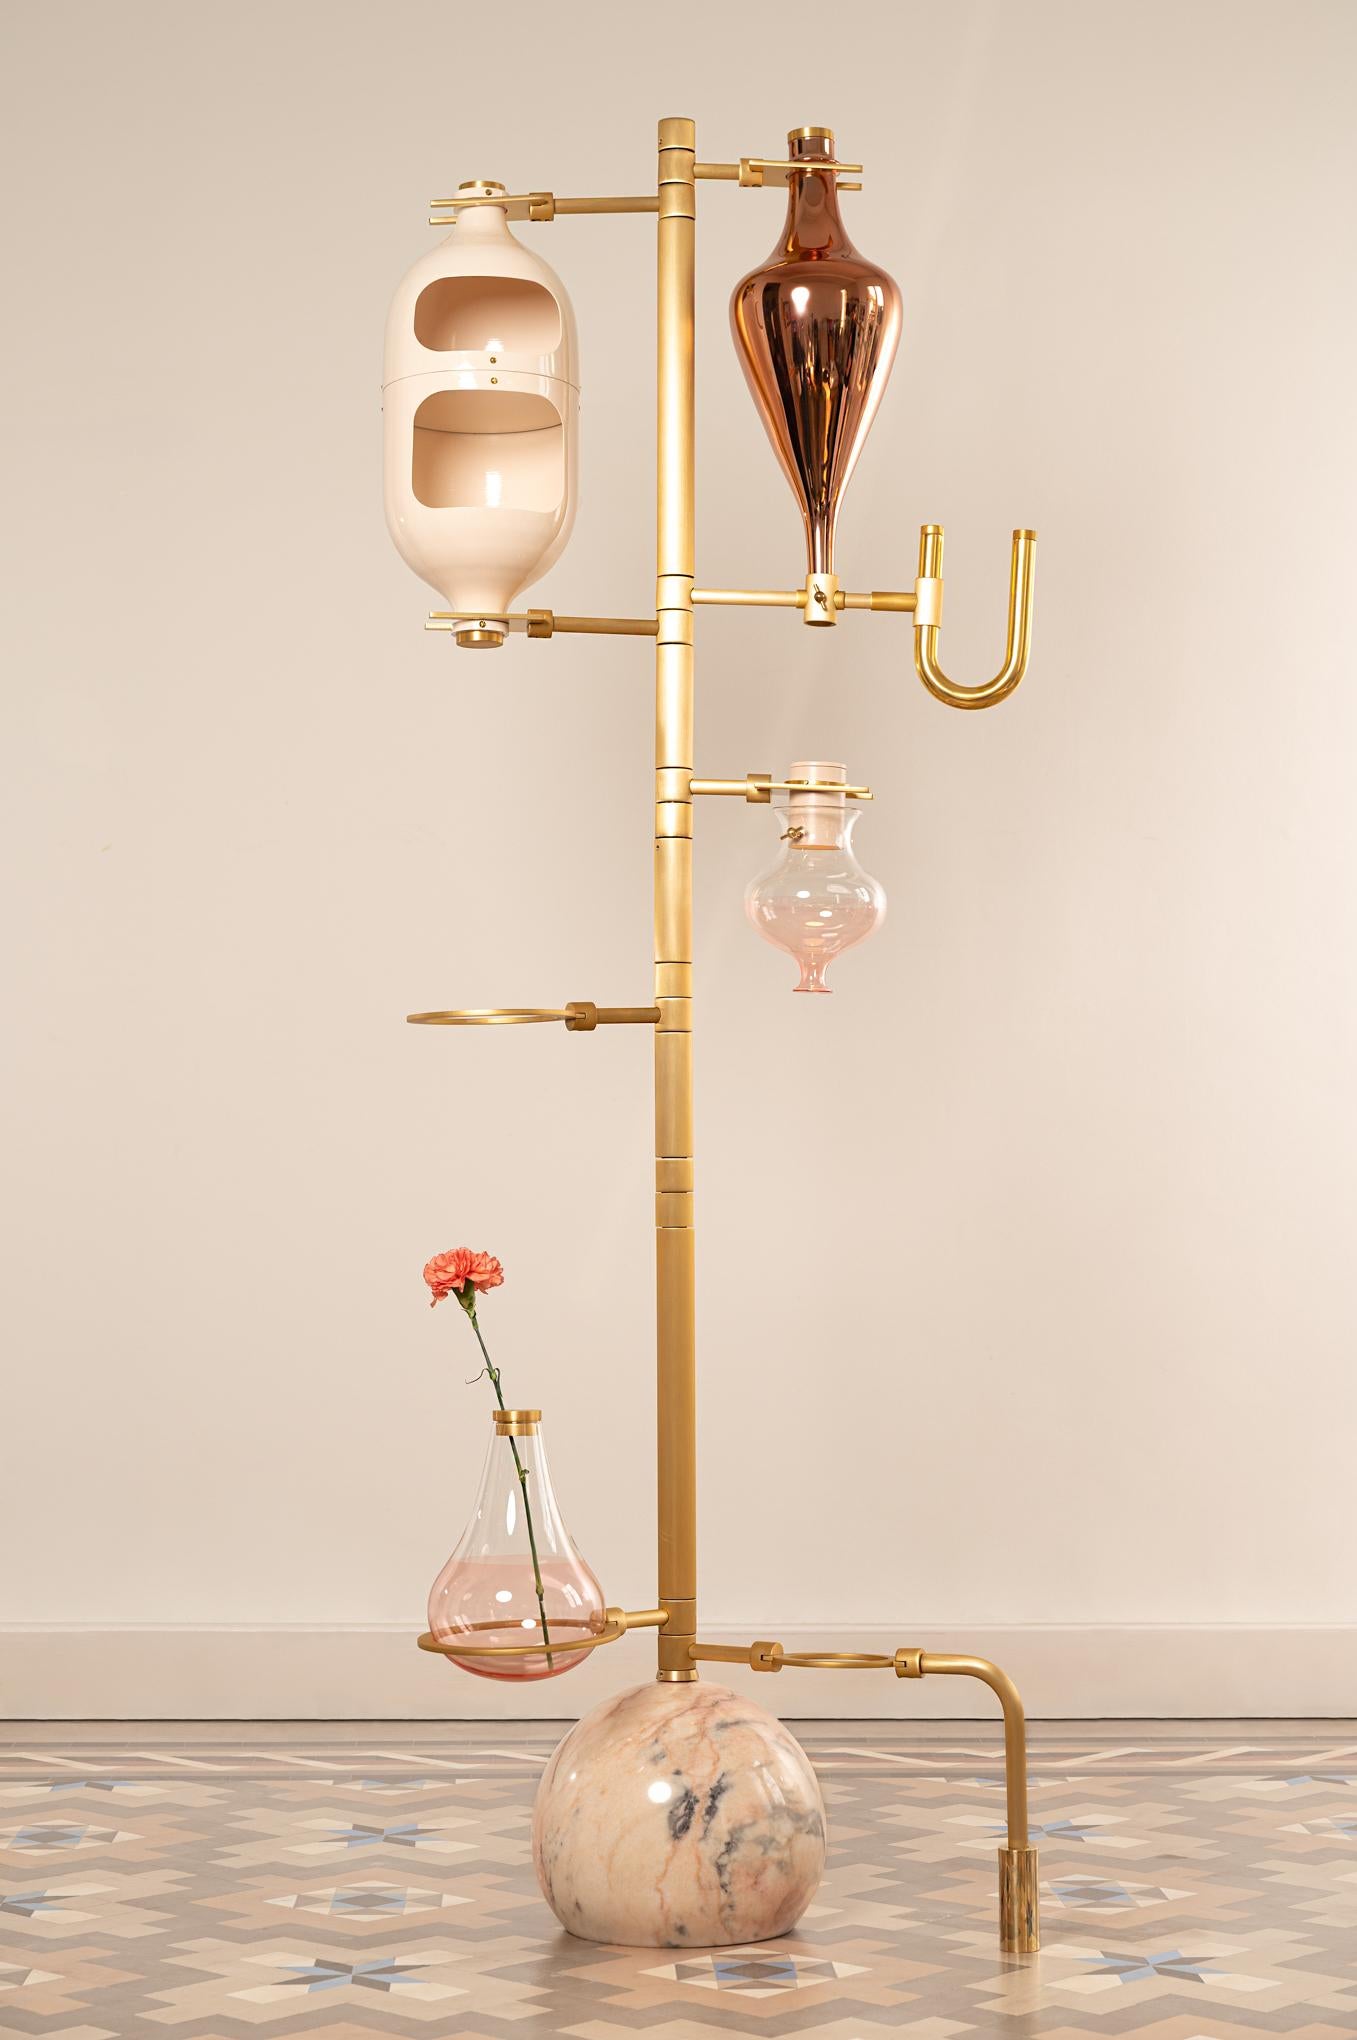  Interior designer Hania Jneid looked to chemistry sets when designing her elaborate floor lamp, named the Emotional Lab light.

The Emotional Lab floor lamp consists of a slender metal stand supporting several beaker-like glass vessels that light